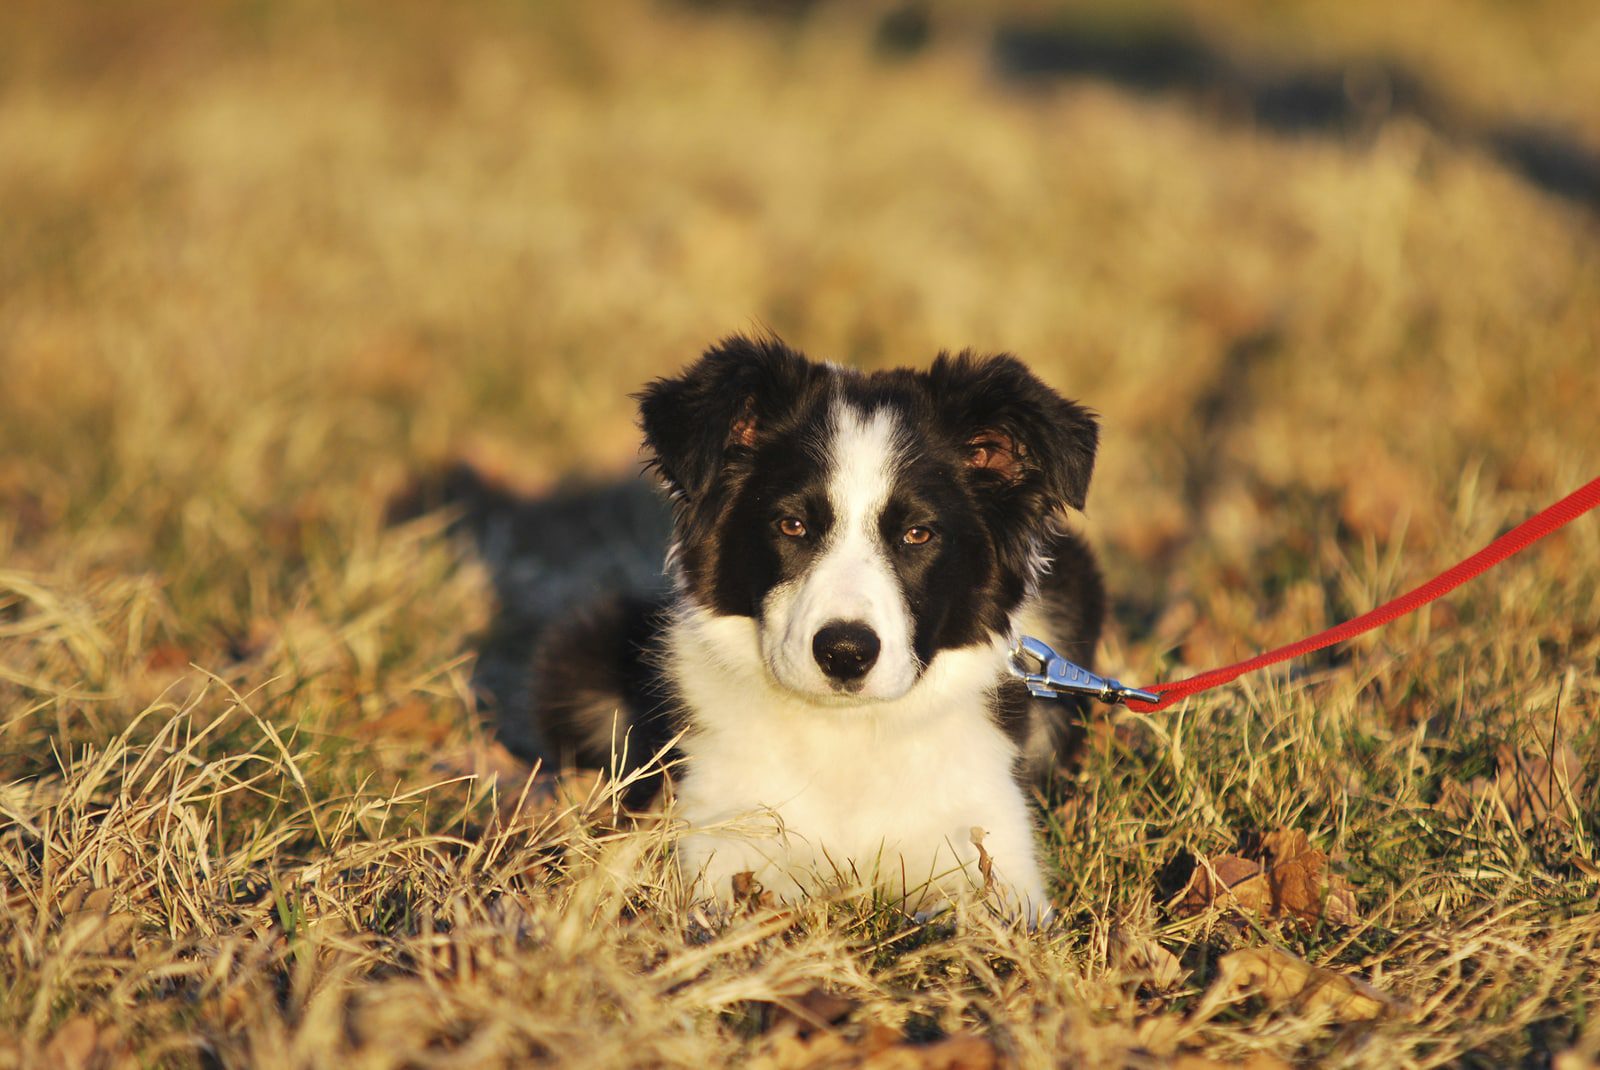 How to teach a puppy to a leash?